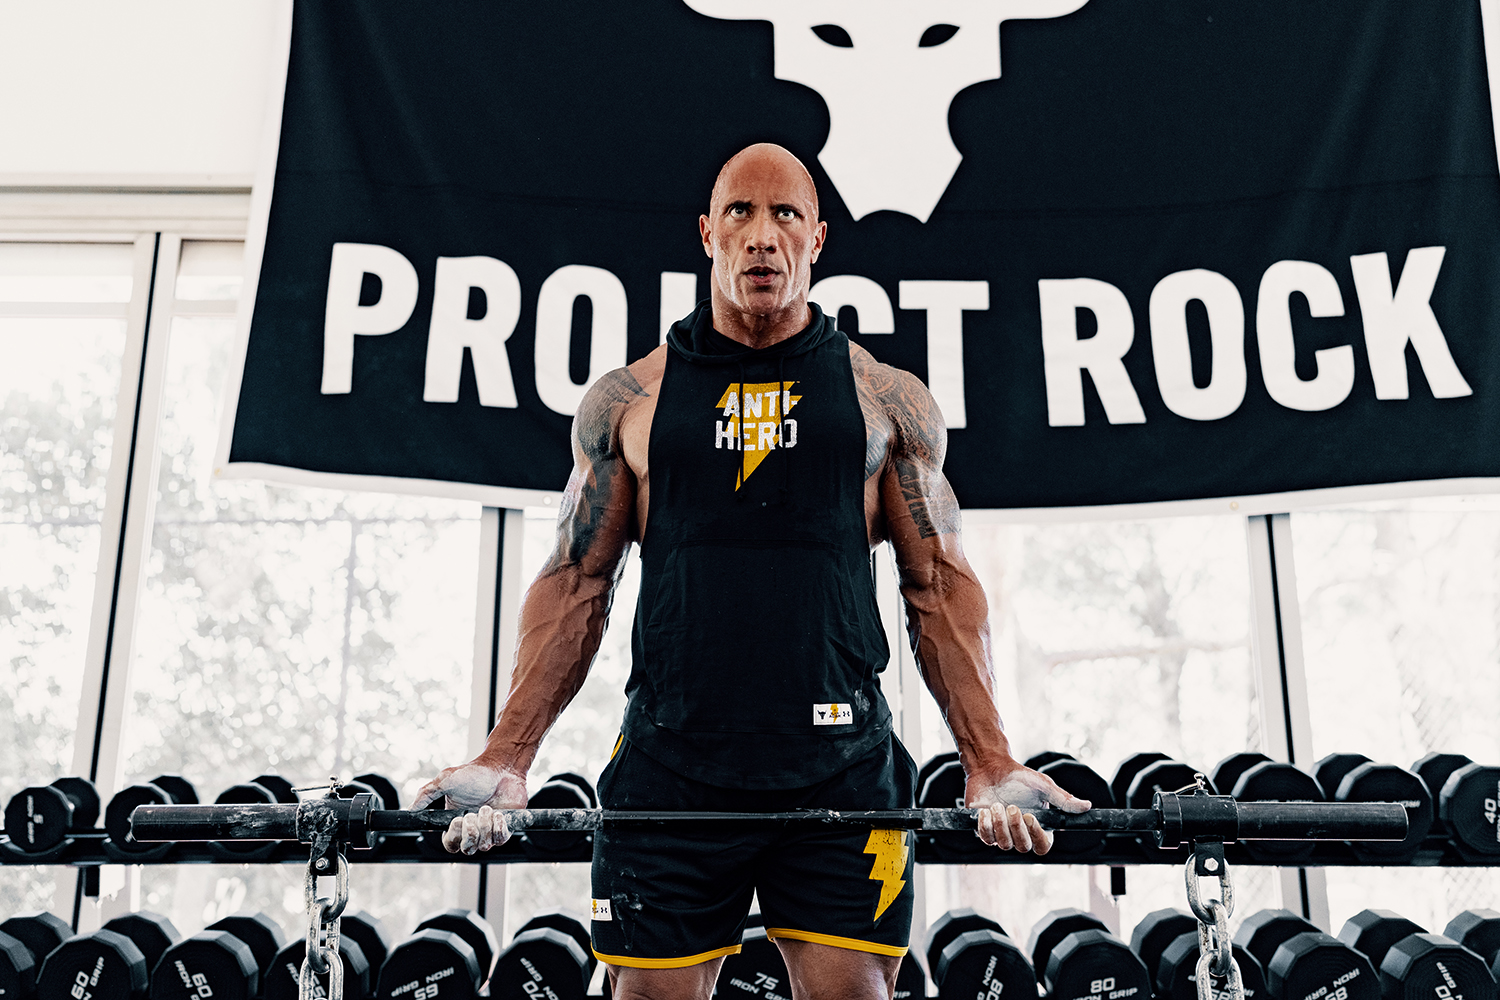 Dwayne ‘The Rock’ Johnson On Getting Into The Best Shape Of His Life At 50